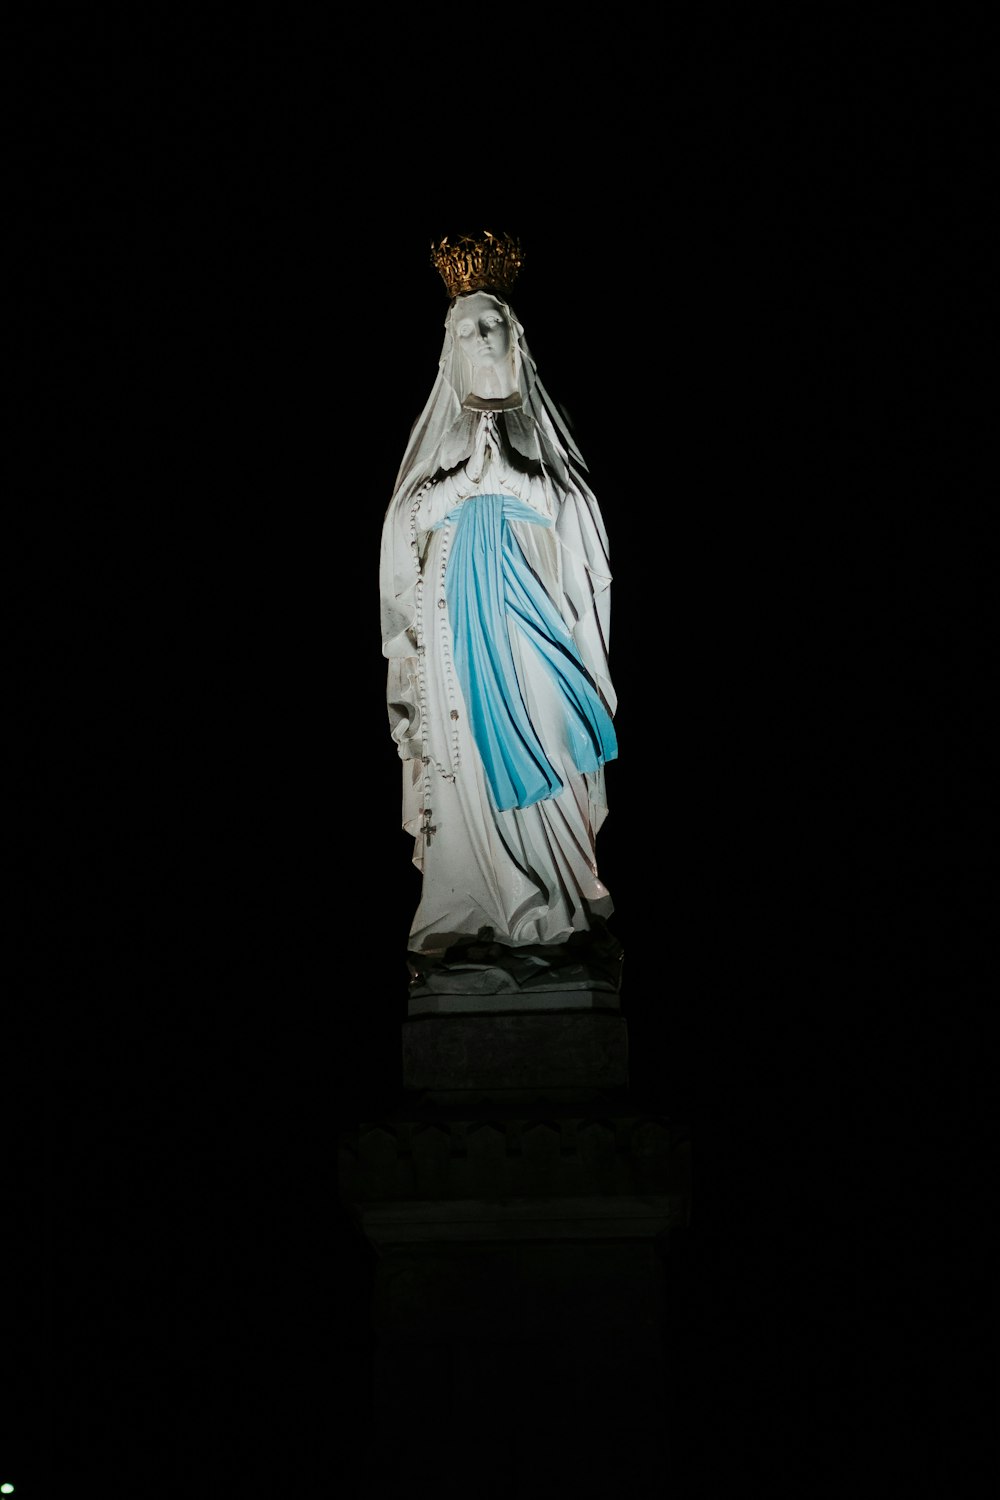 virgin mary statue on black surface